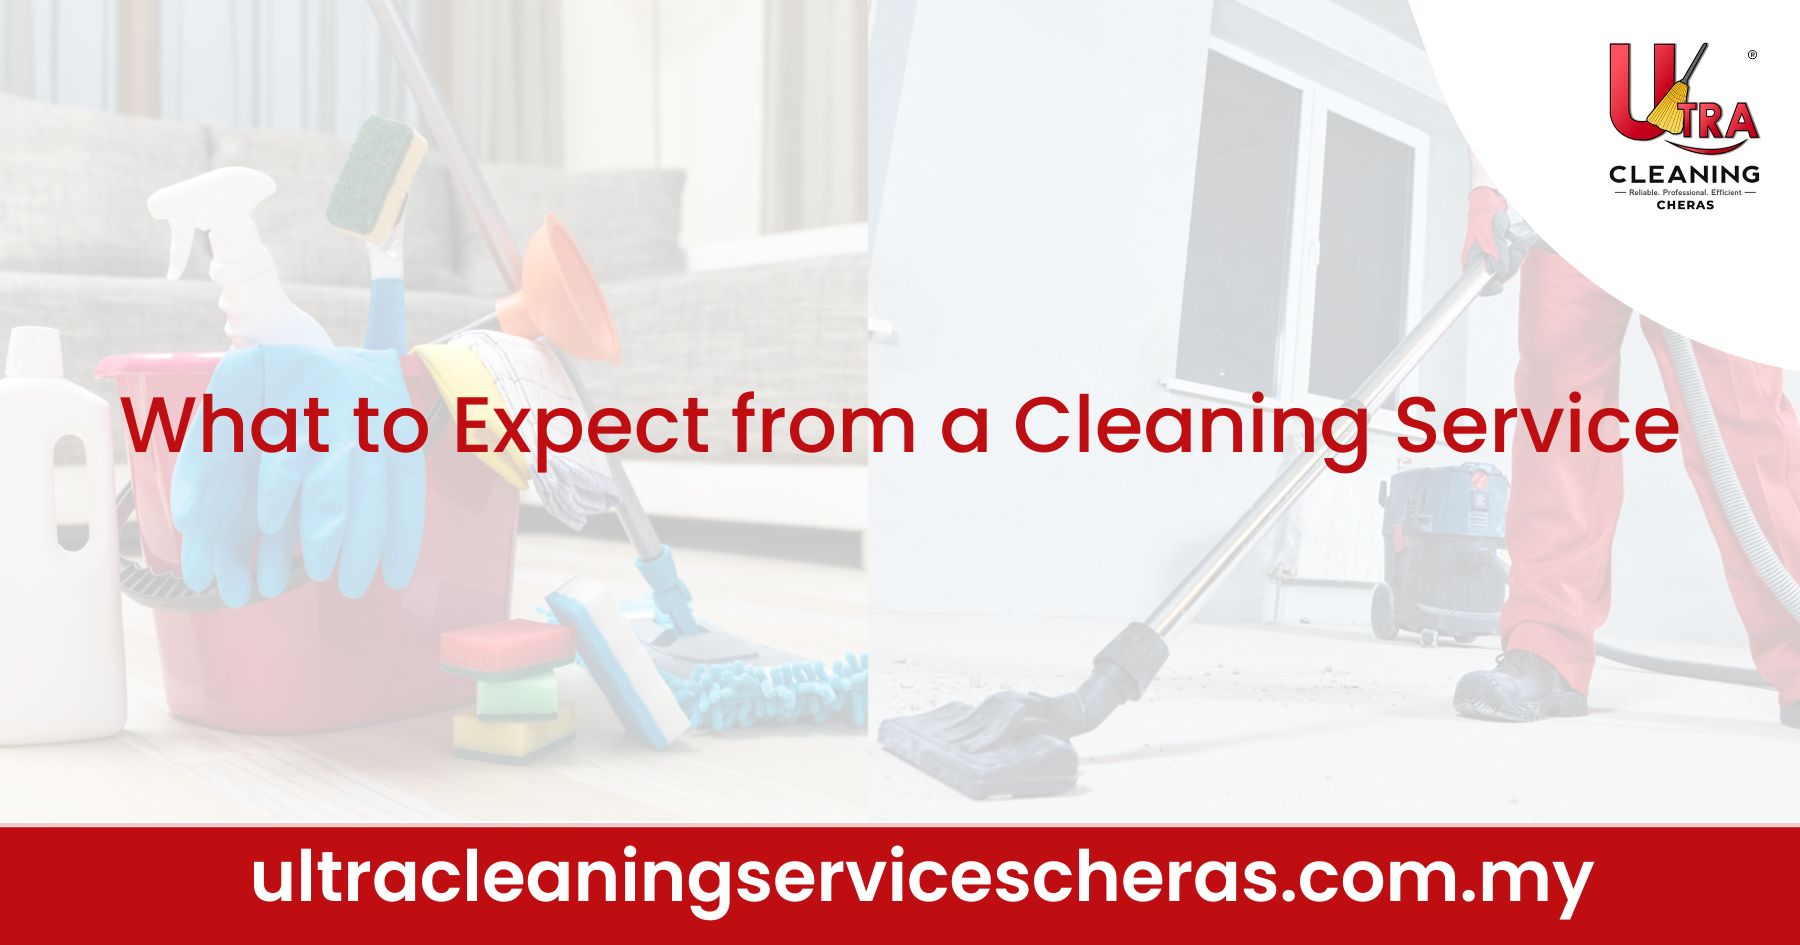 What to Expect from a Cleaning Service